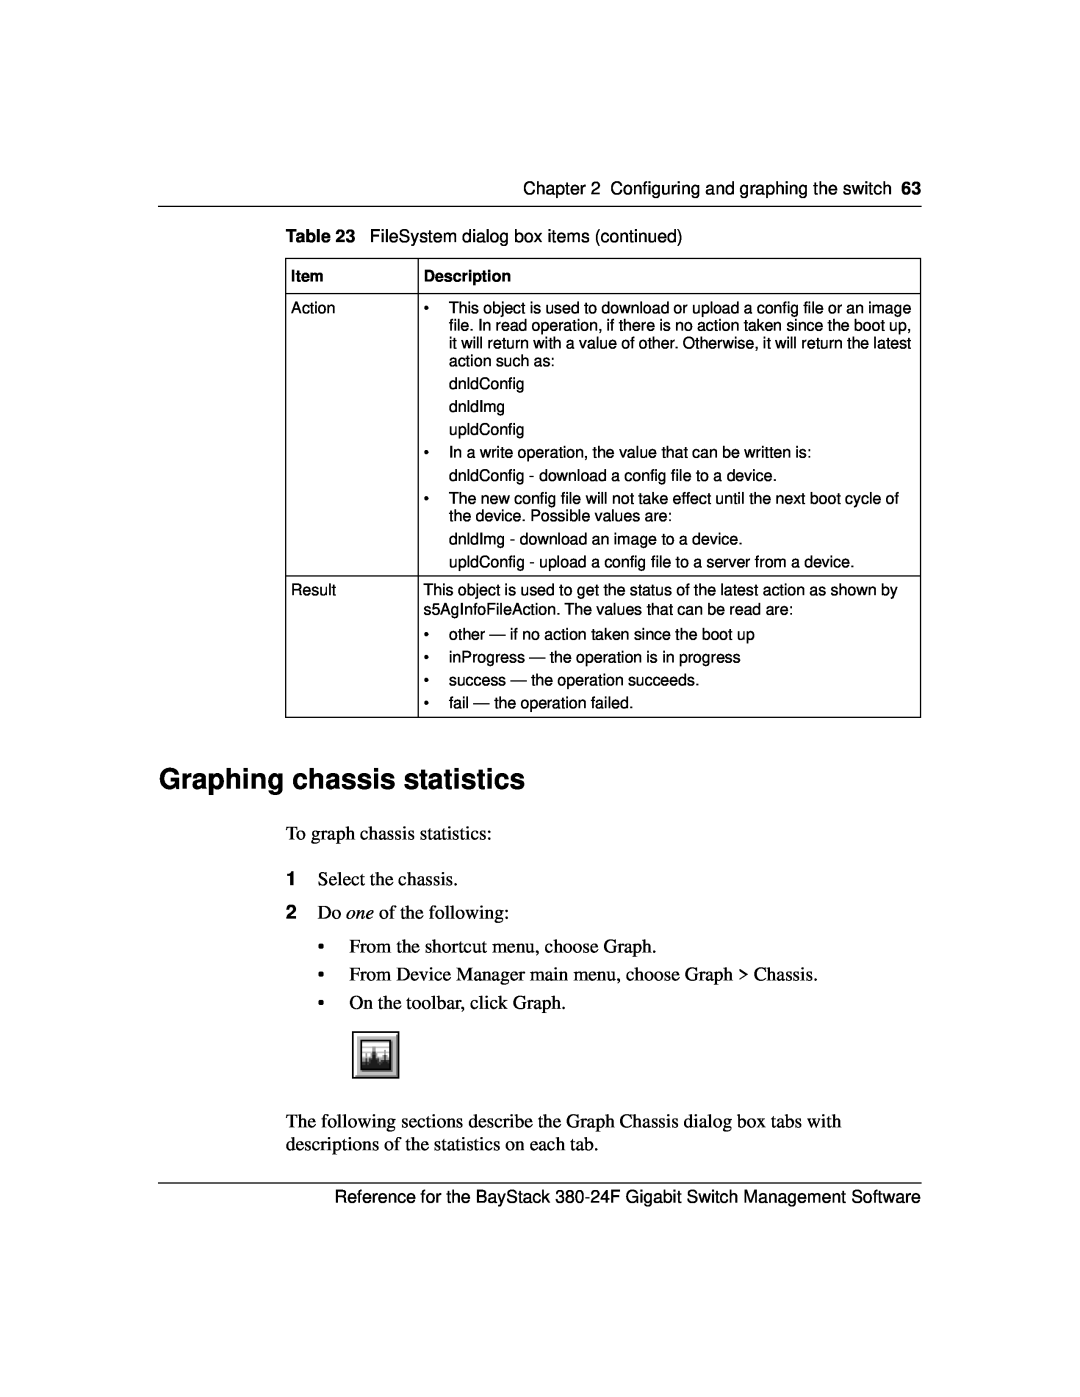 Nortel Networks 214393-A manual Graphing chassis statistics, Configuring and graphing the switch, Description 